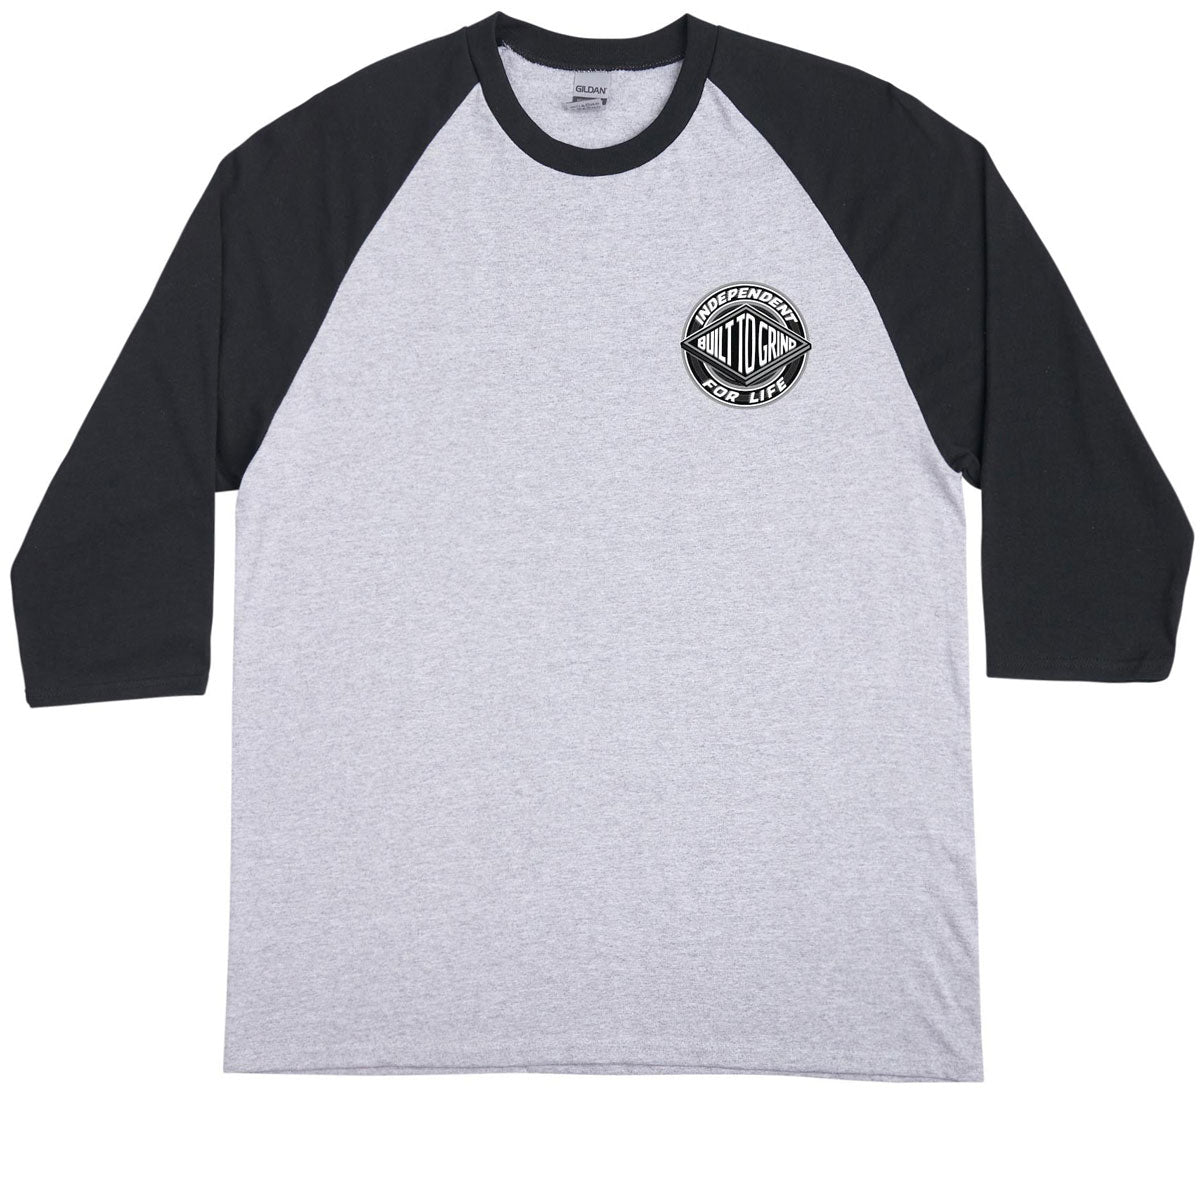 Independent For Life Clutch 3/4 Sleeve T-Shirt - Sport Grey/Black image 2